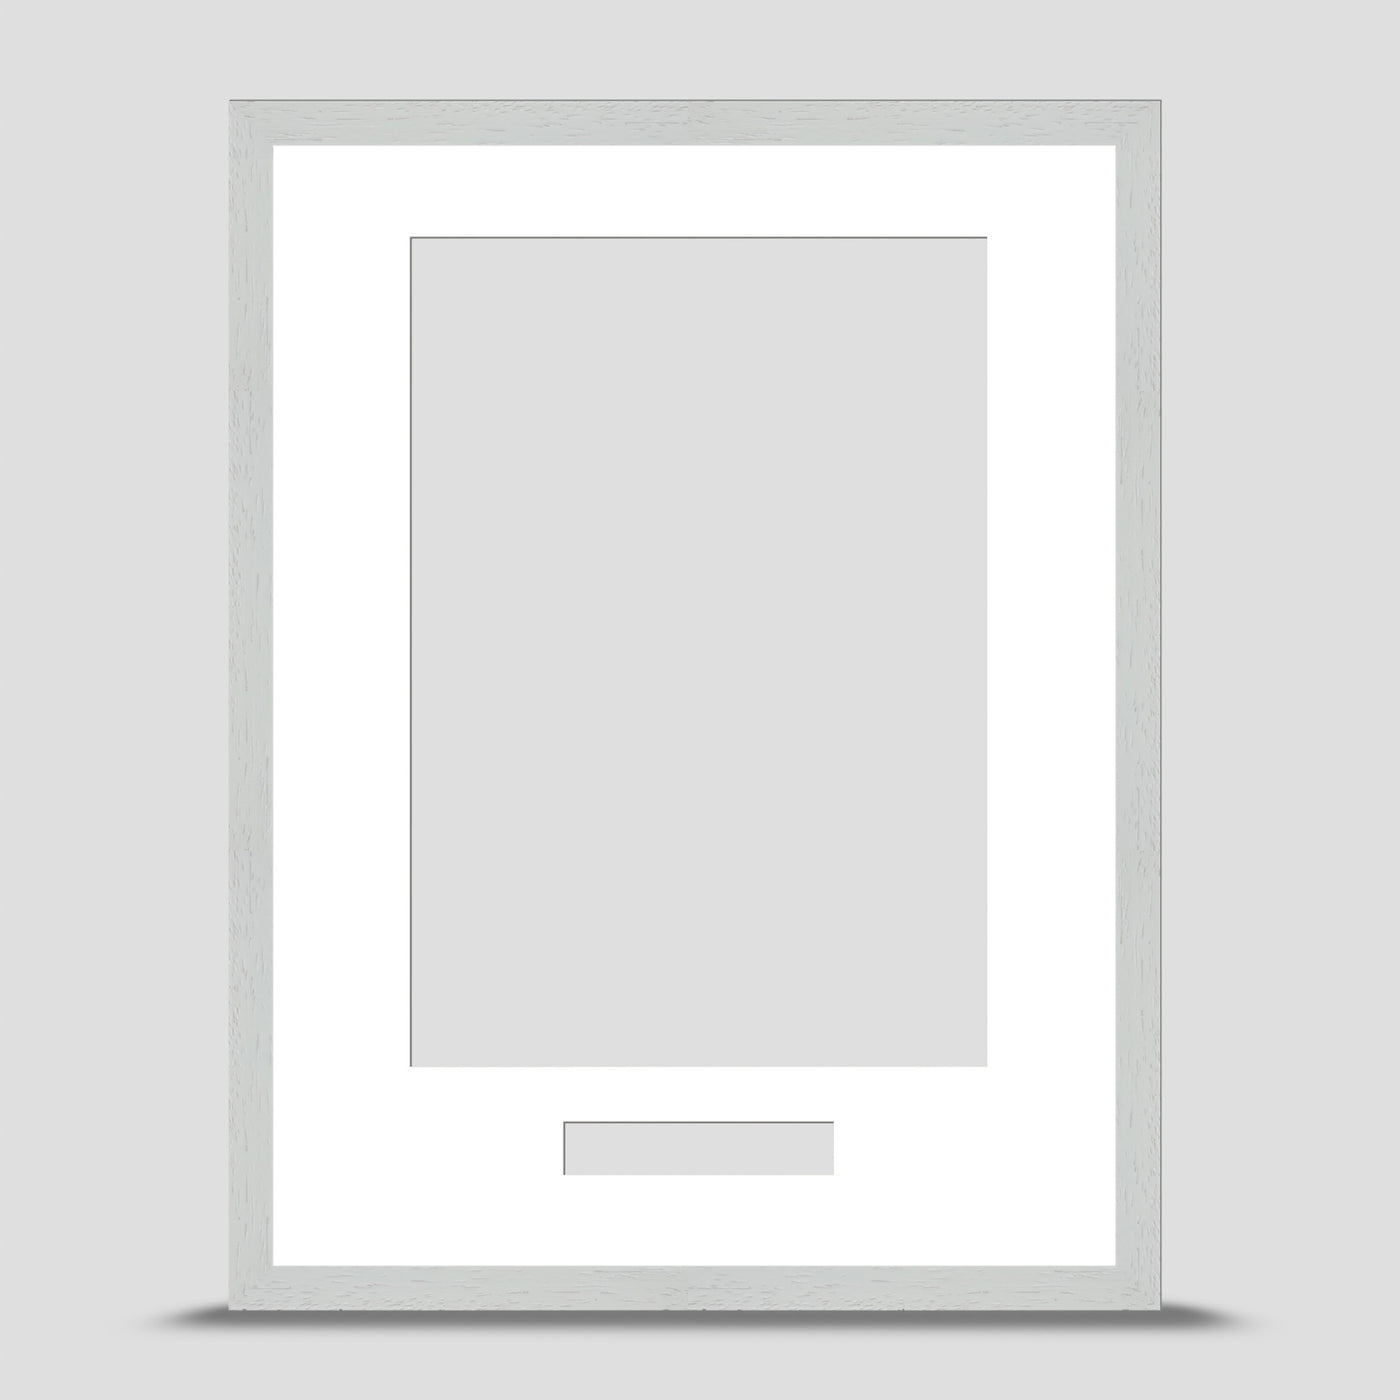 16x12 Classic White Picture Frame Including a A4 Mount with text box - Landscape